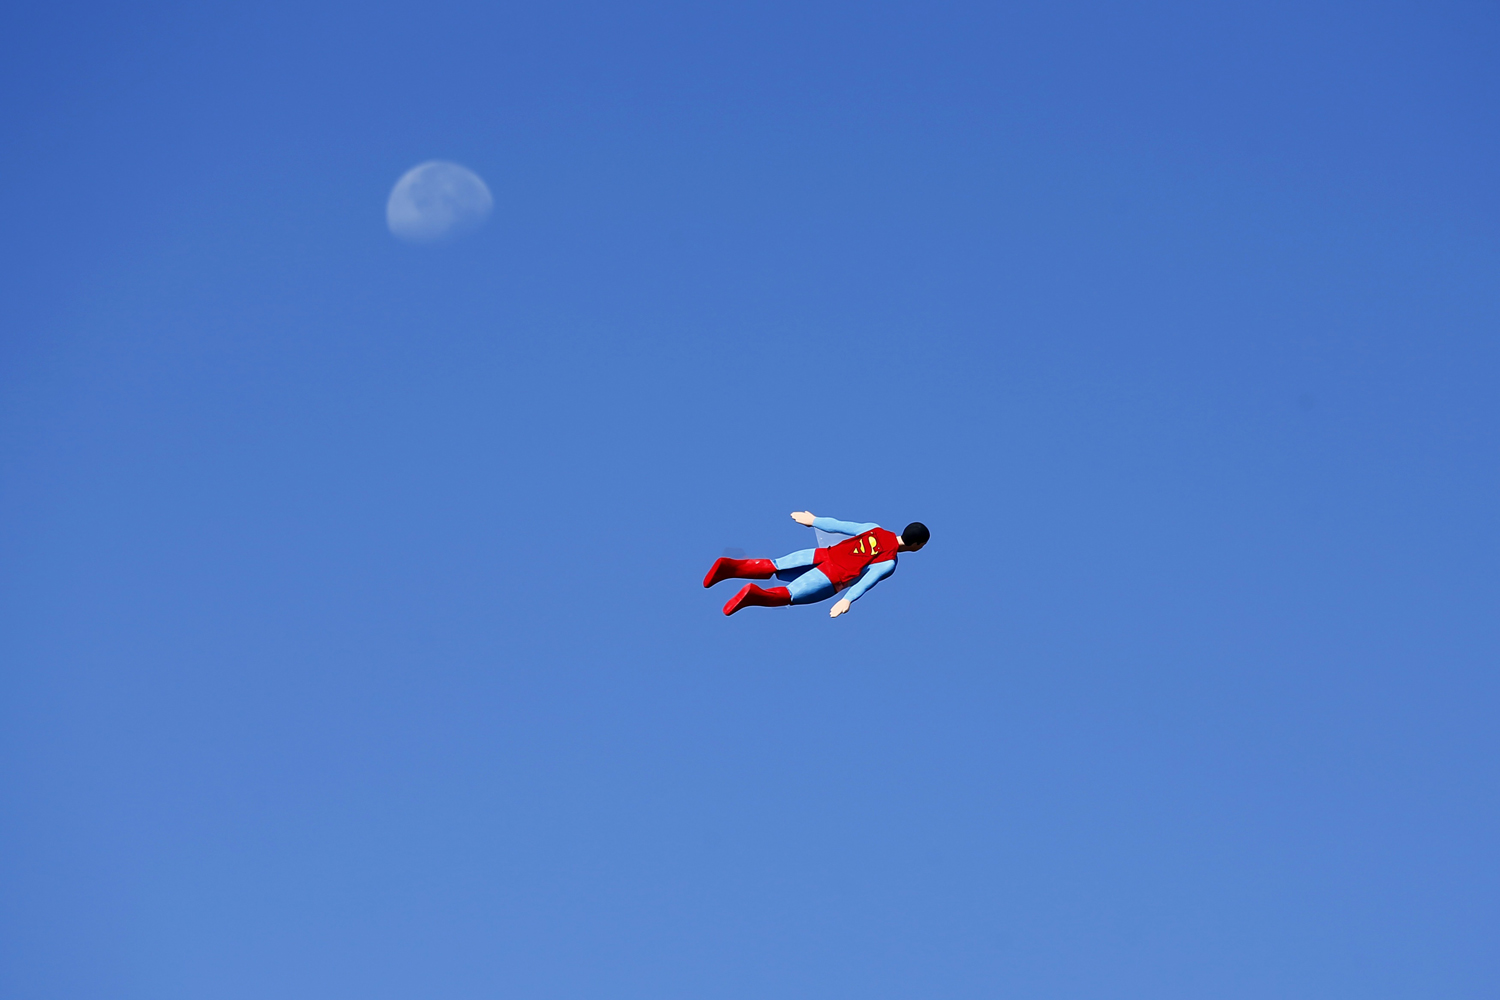 June 27, 2013. A radio-controlled Superman plane, flown by designer Otto Dieffenbach, passes the moon during a test flight in San Diego, California.